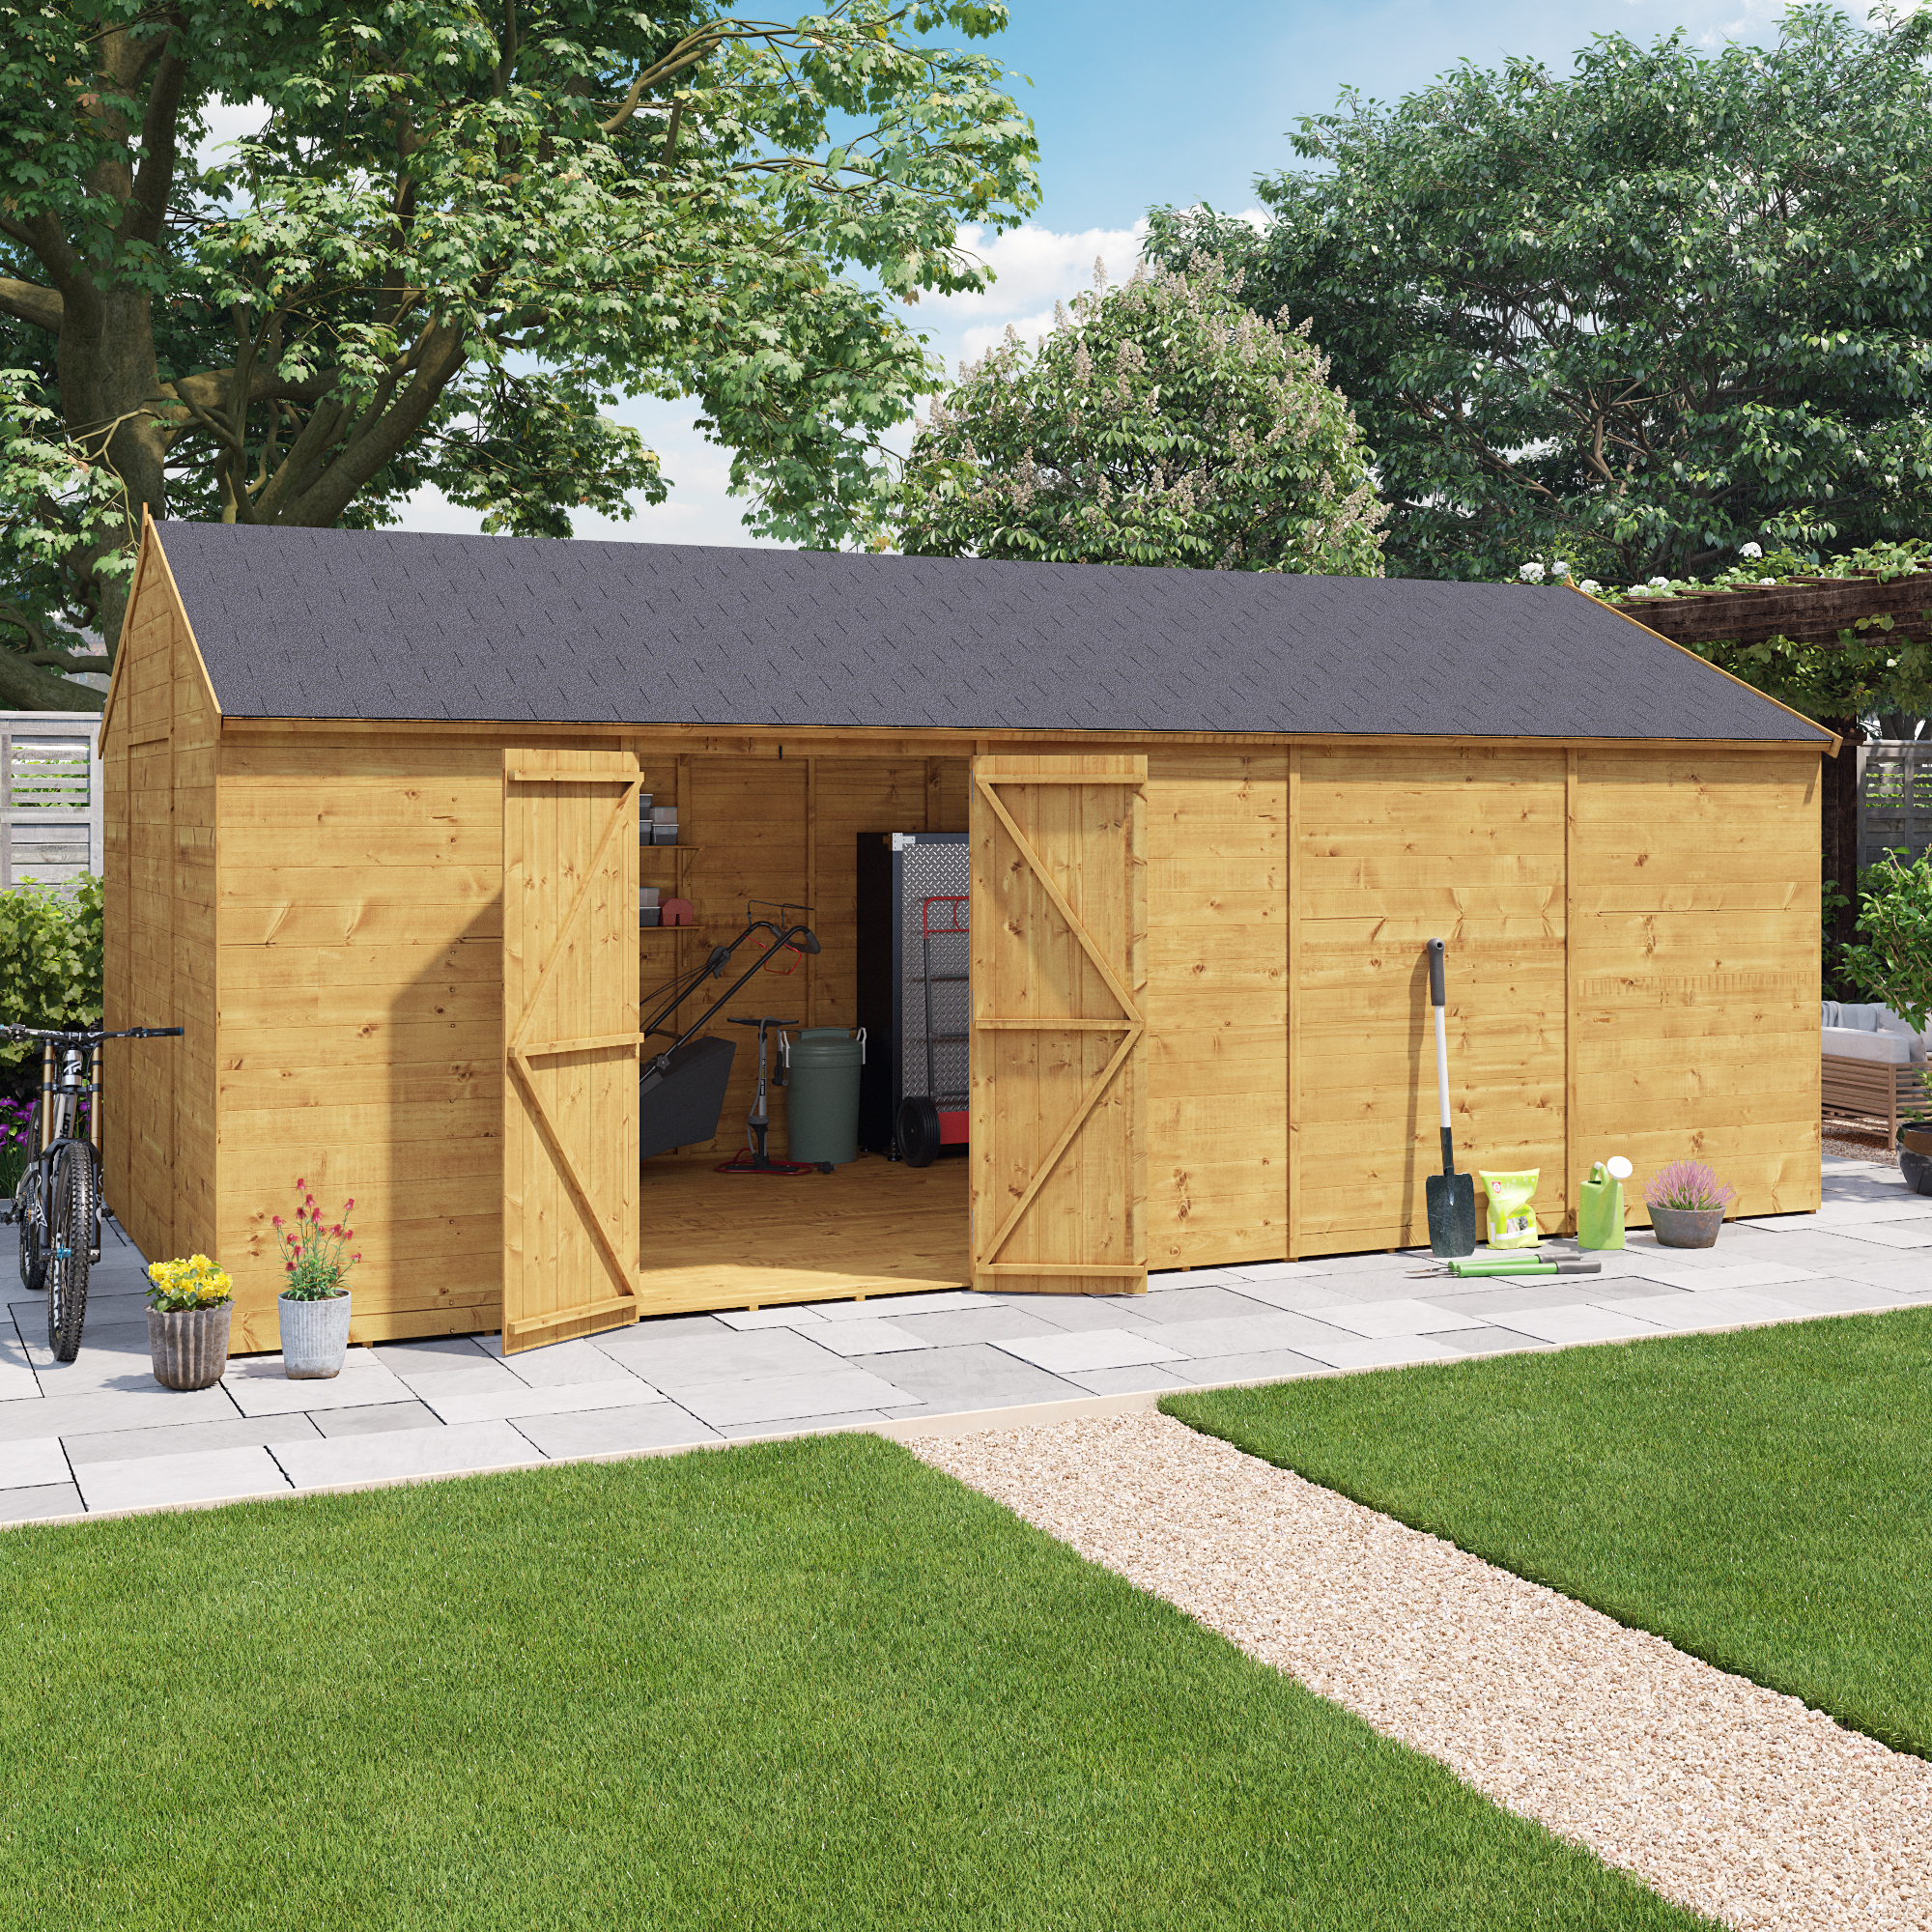 20 x 10 Shed - BillyOh Expert Reverse Workshop Large Garden Shed - Windowless